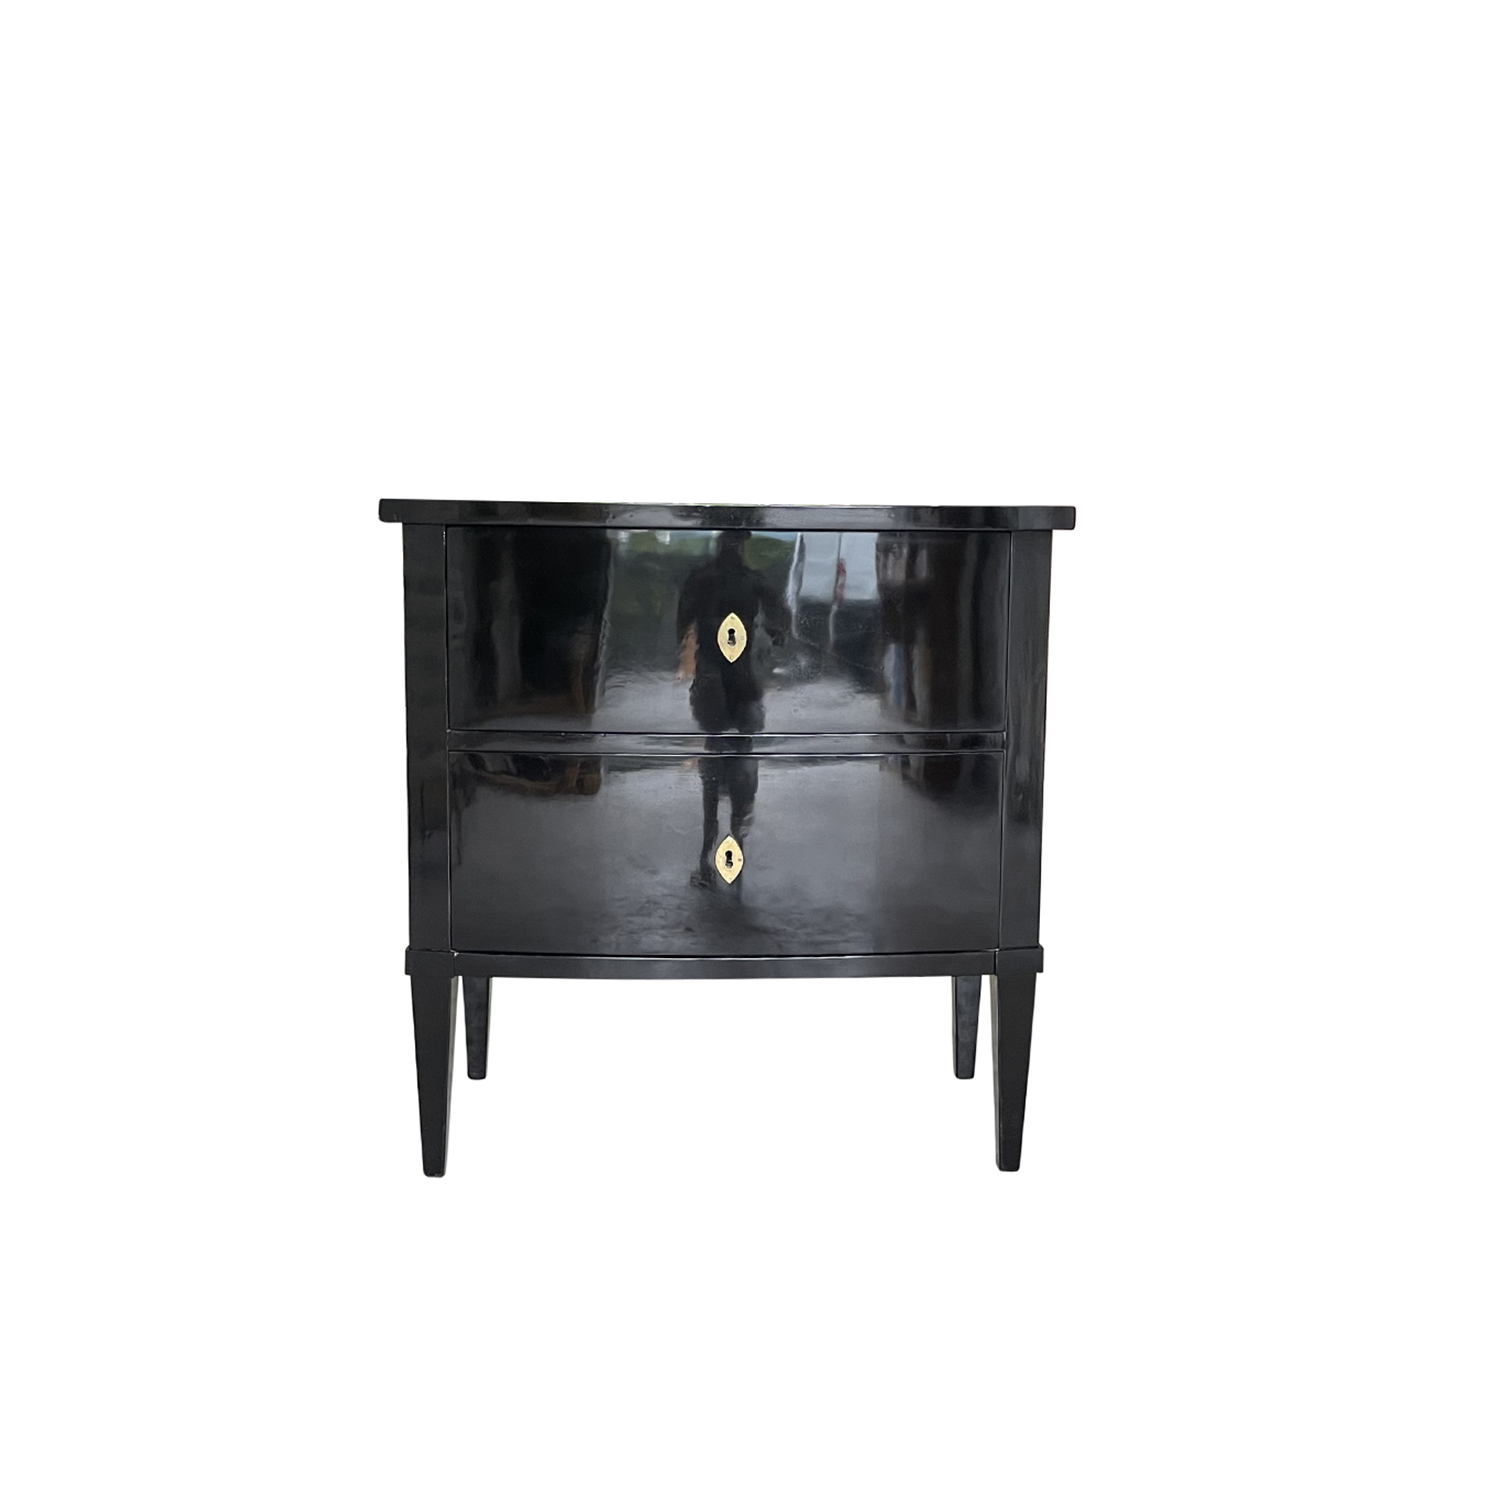 19th Century French Empire Polished Ebony Nightstand – Single Antique Cabinet